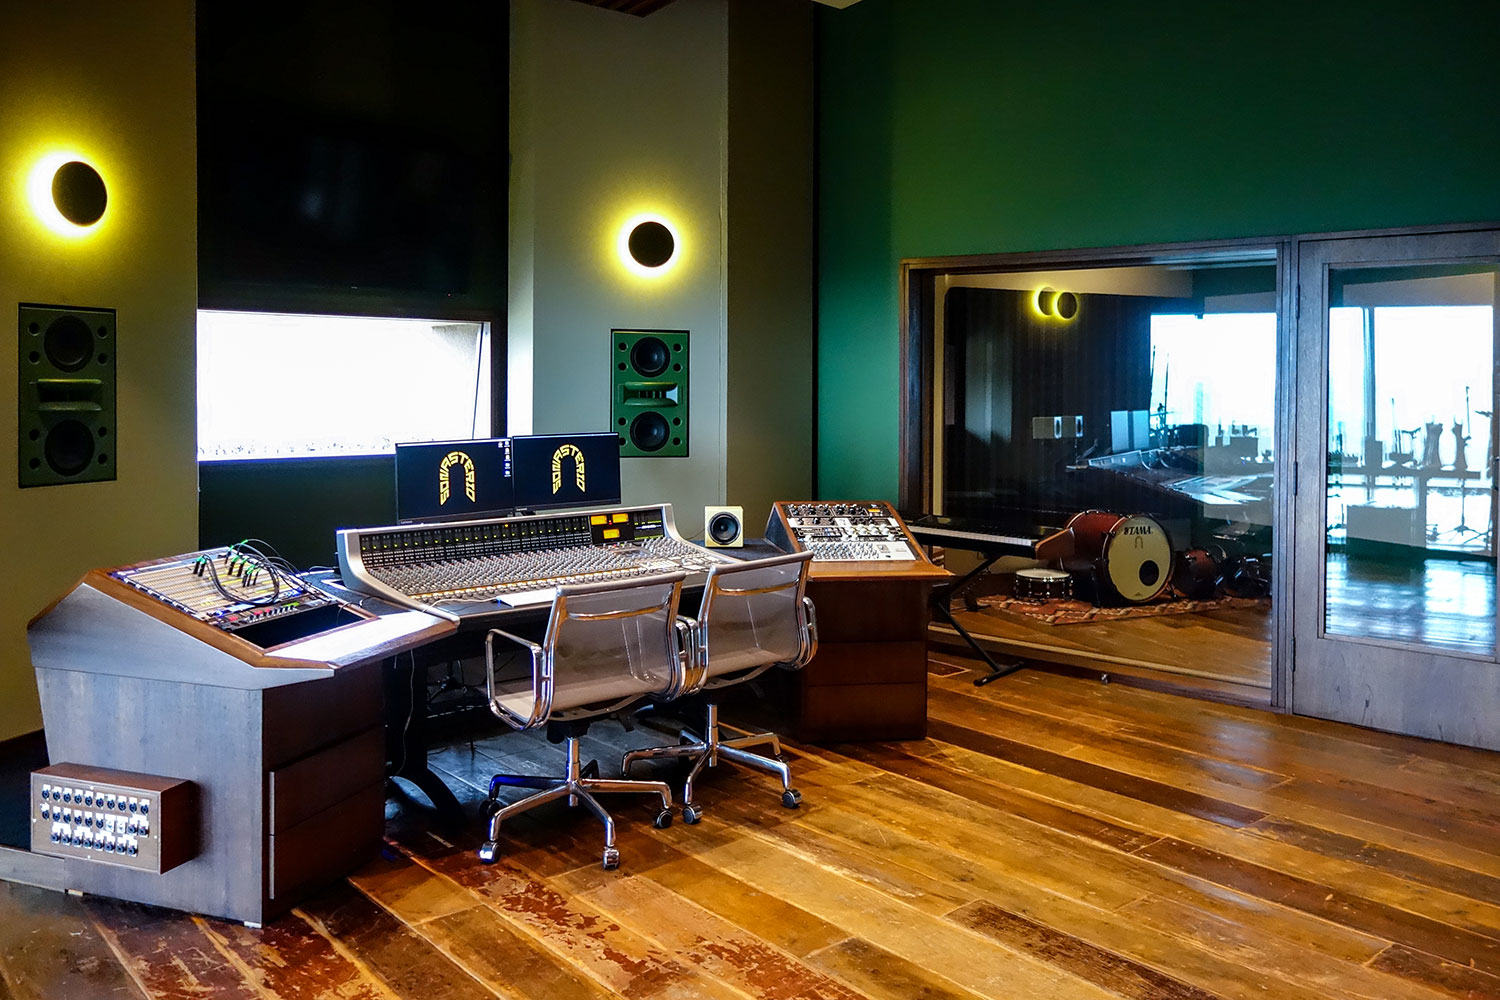 Sonastério Studios is a work of art in itself. More than just a studio, it is a house of creation designed to enhance the natural expressiveness of each artist. A collaboration of João Diniz Arquitetura office and WSDG, one of the world's leading acoustic architectural design firms. Control Room